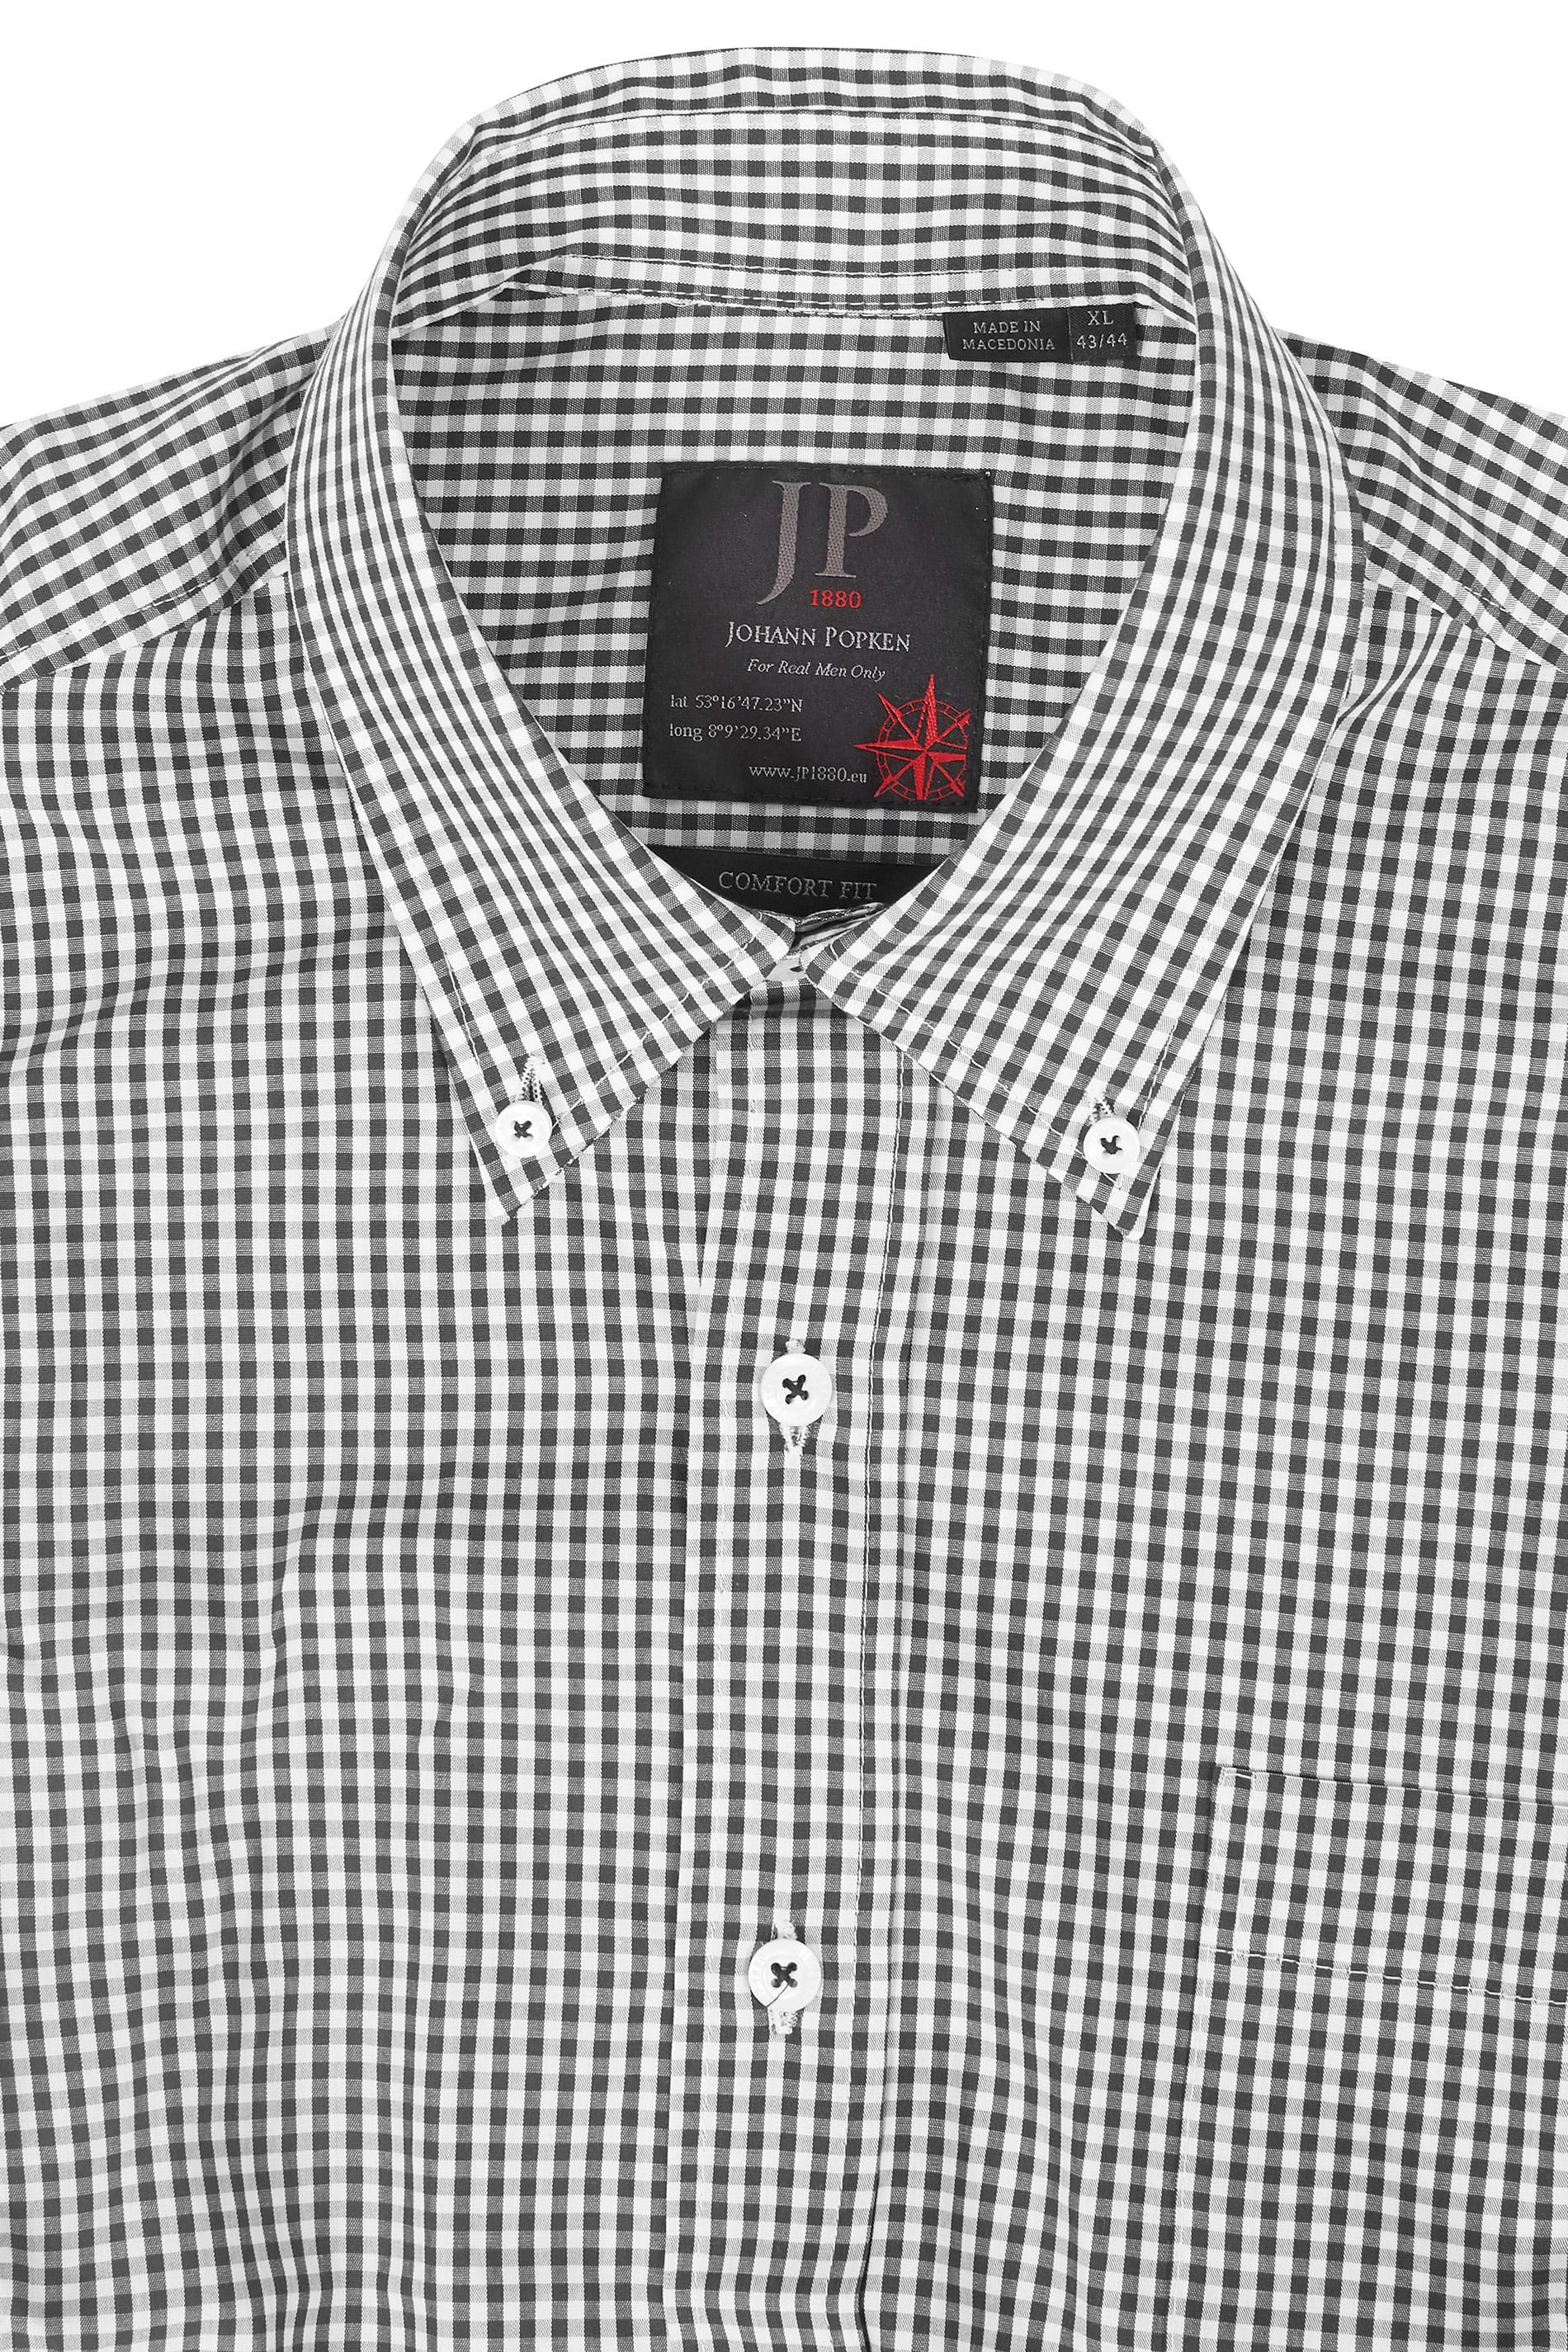 Black & White Comfort Fit Gingham Shirt, Extra Large size L to 7XL